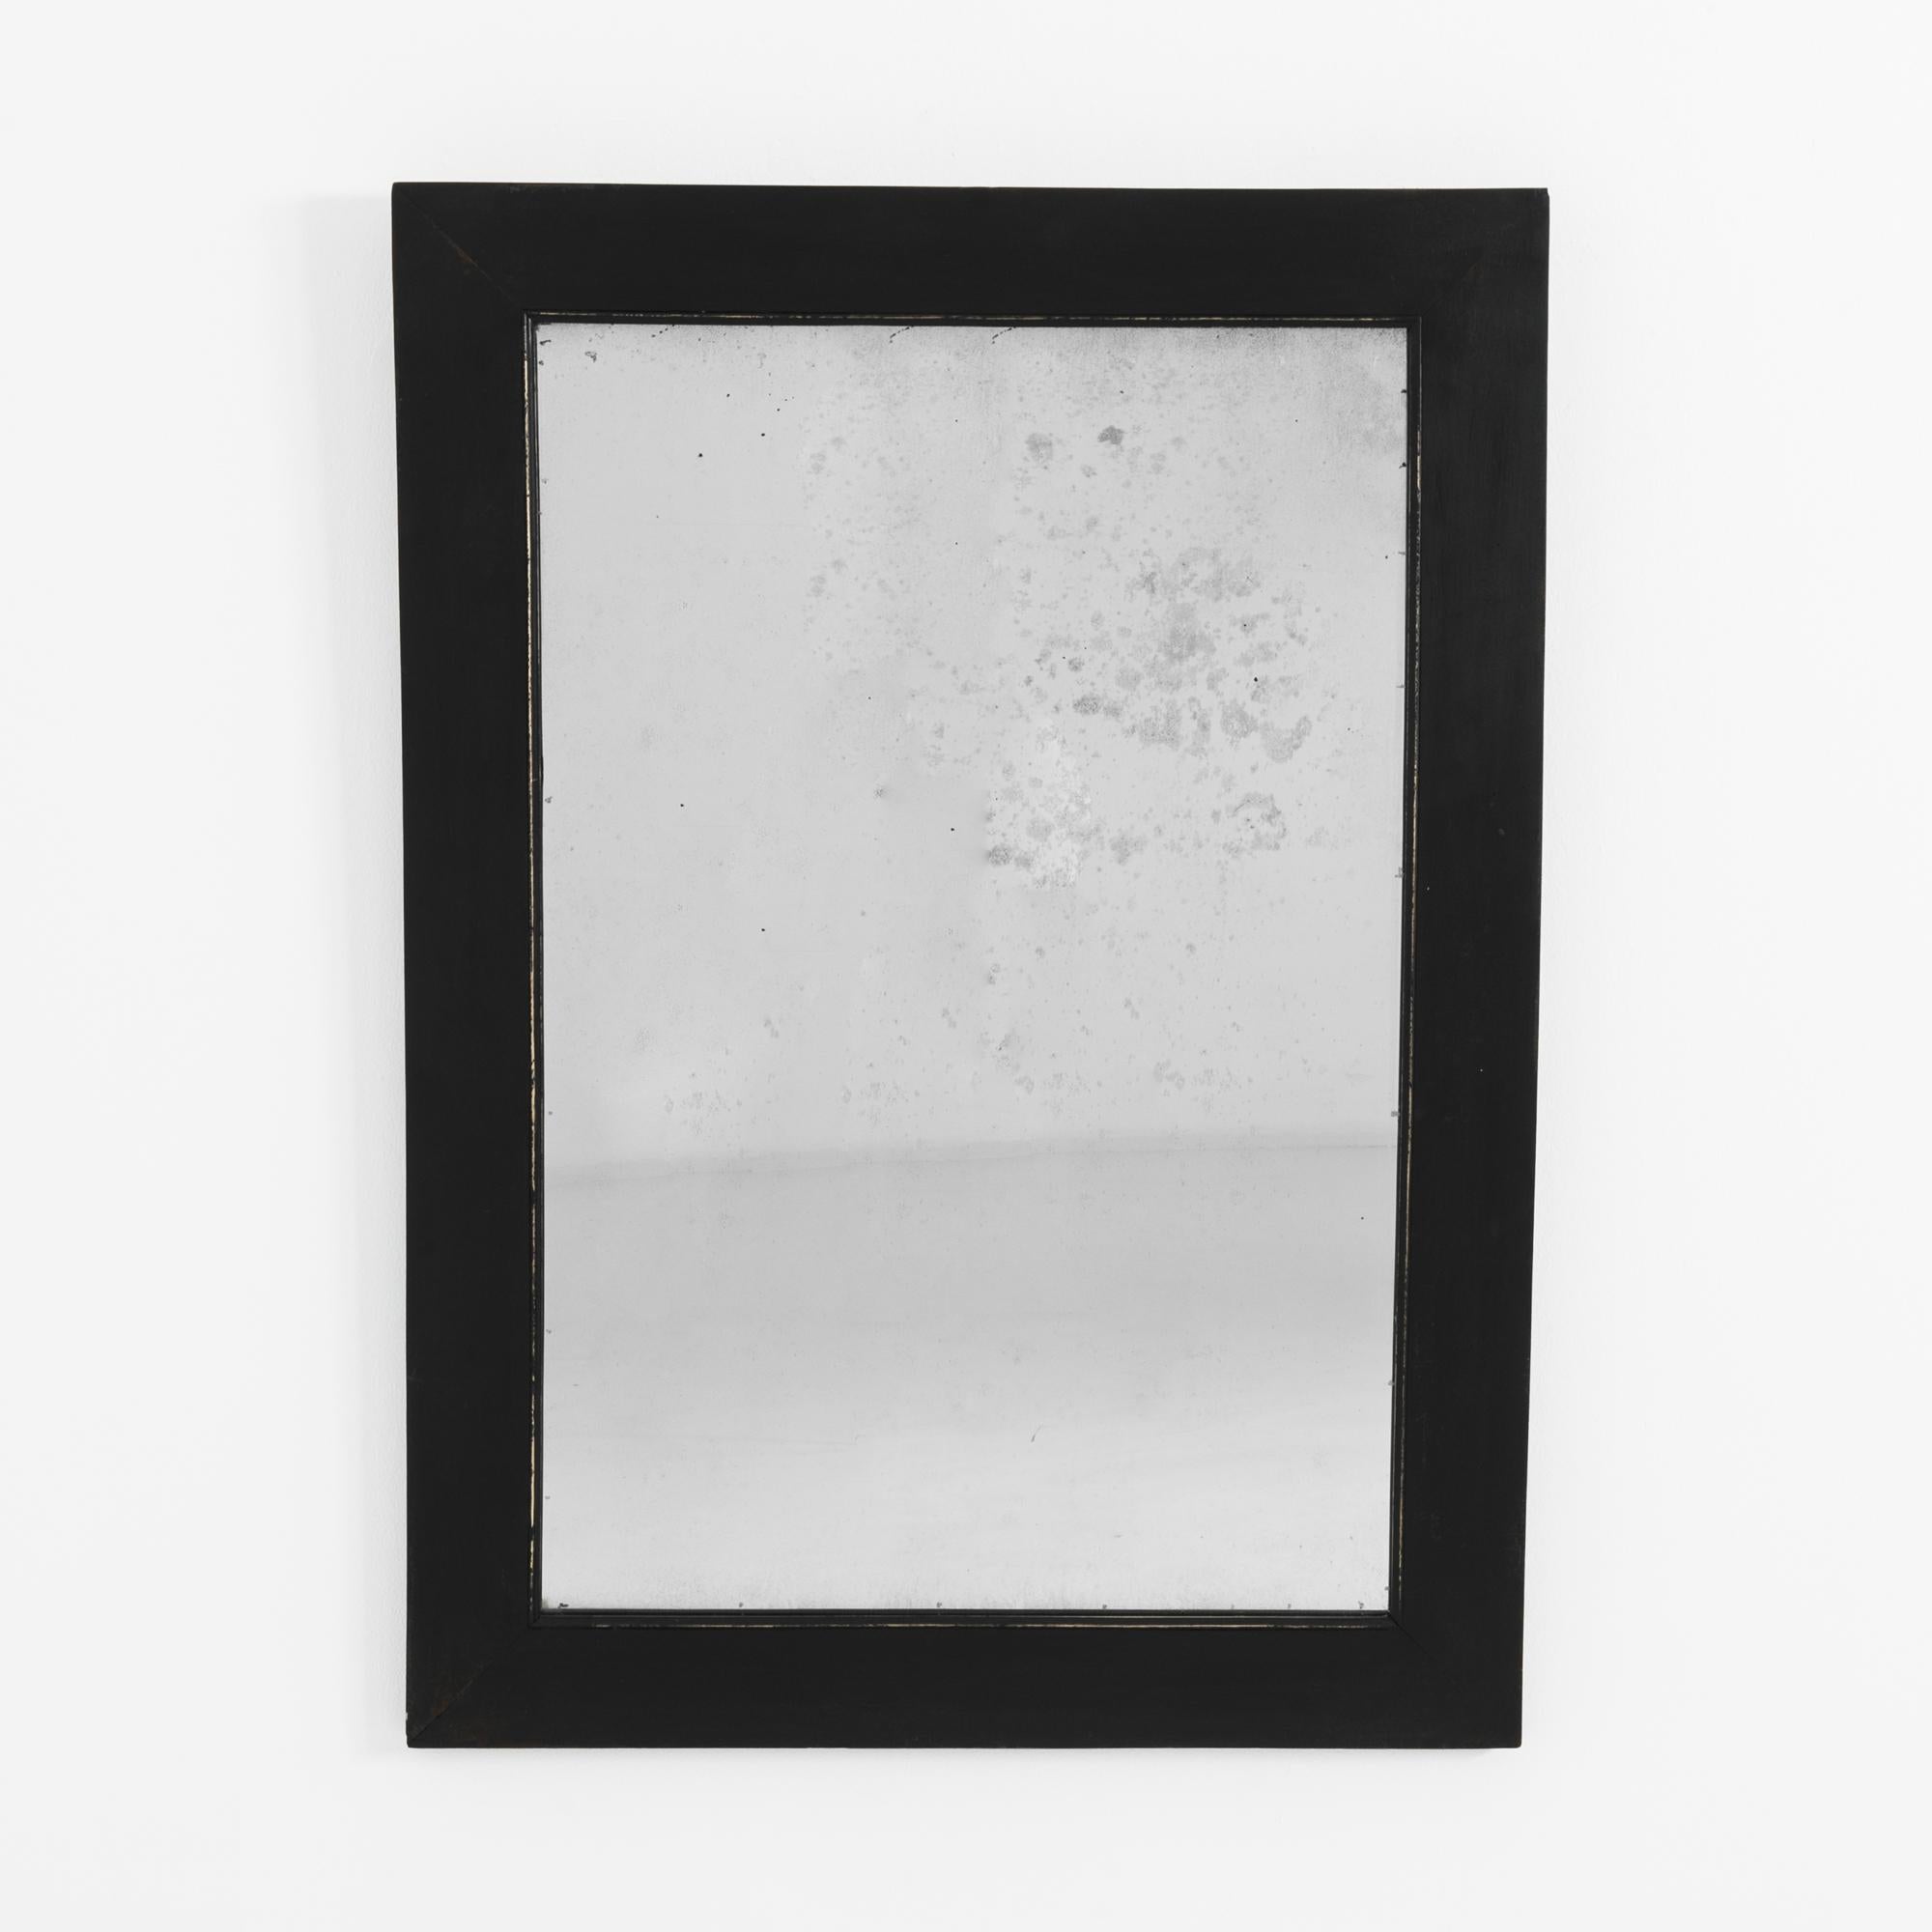 A wooden mirror from France, circa 1900. Elegantly framed in black, a subtle inset profile elevates this simple mirror with the detailed eyes of period craftsmen. The subtle patina of the mirror surface enhances your reflection with a note of